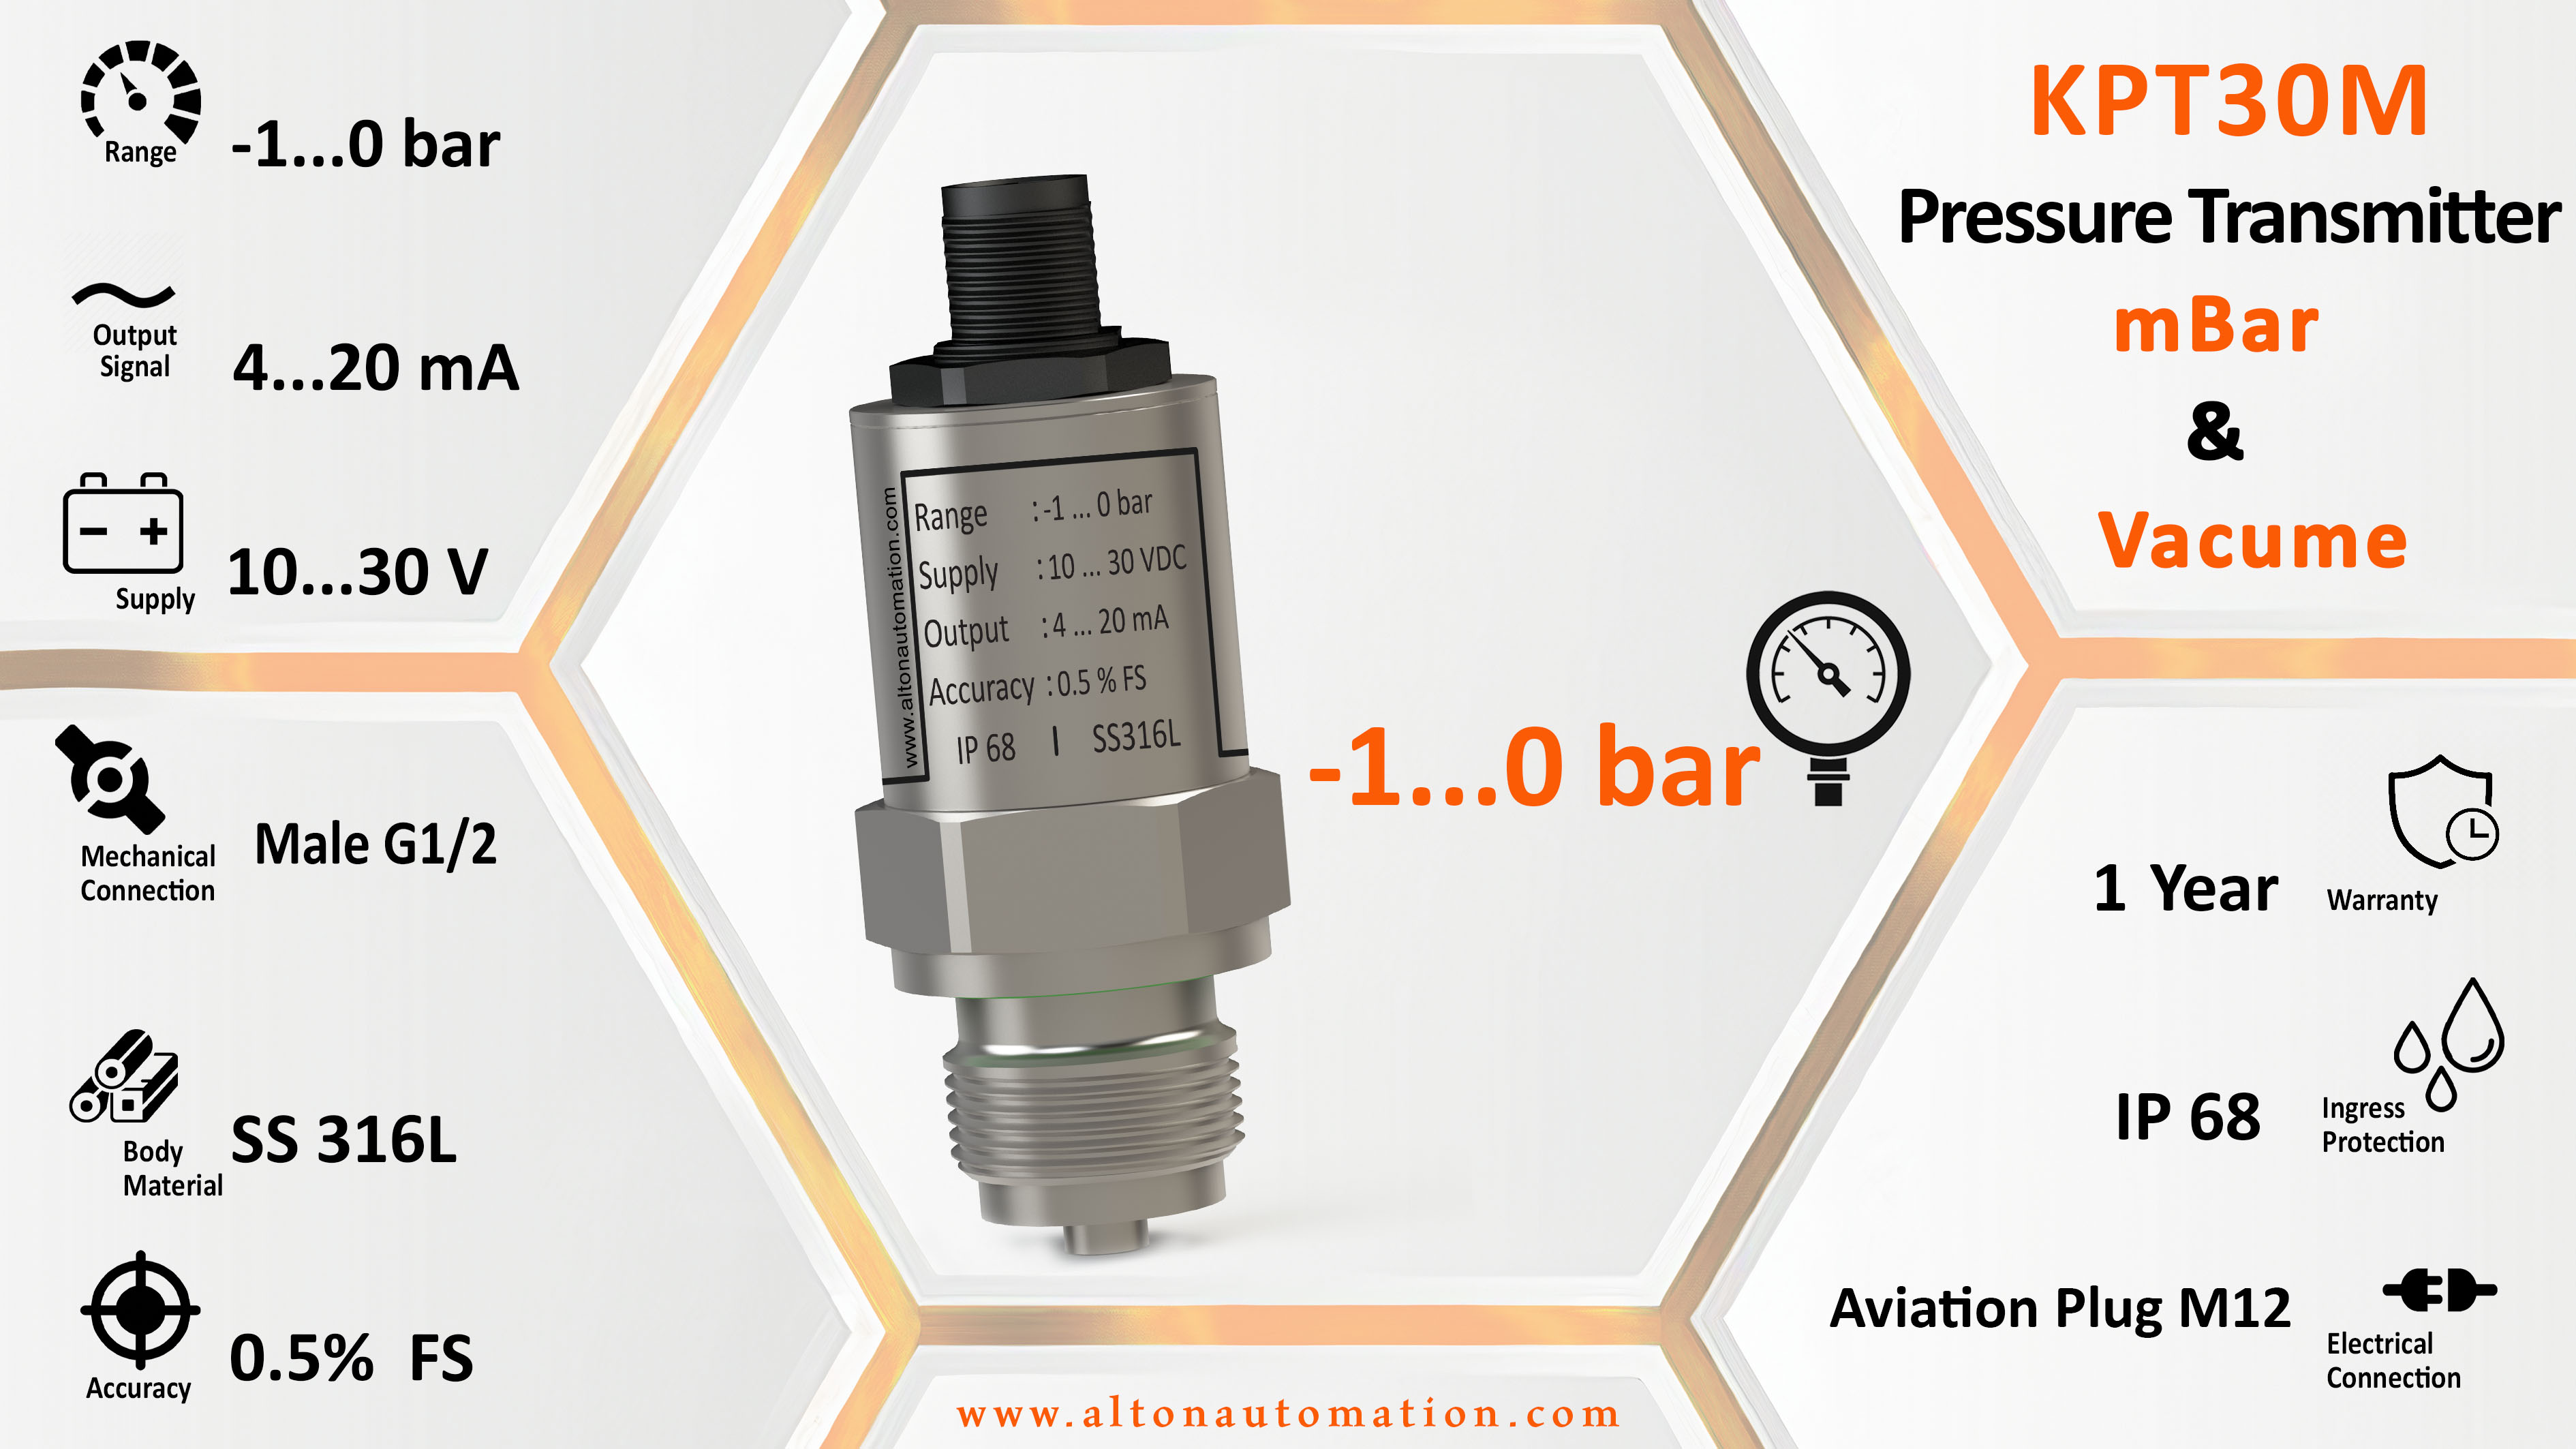 Pressure Transmitter for mbar and vacume_KPT30M-V10-C1-MG2_image_2